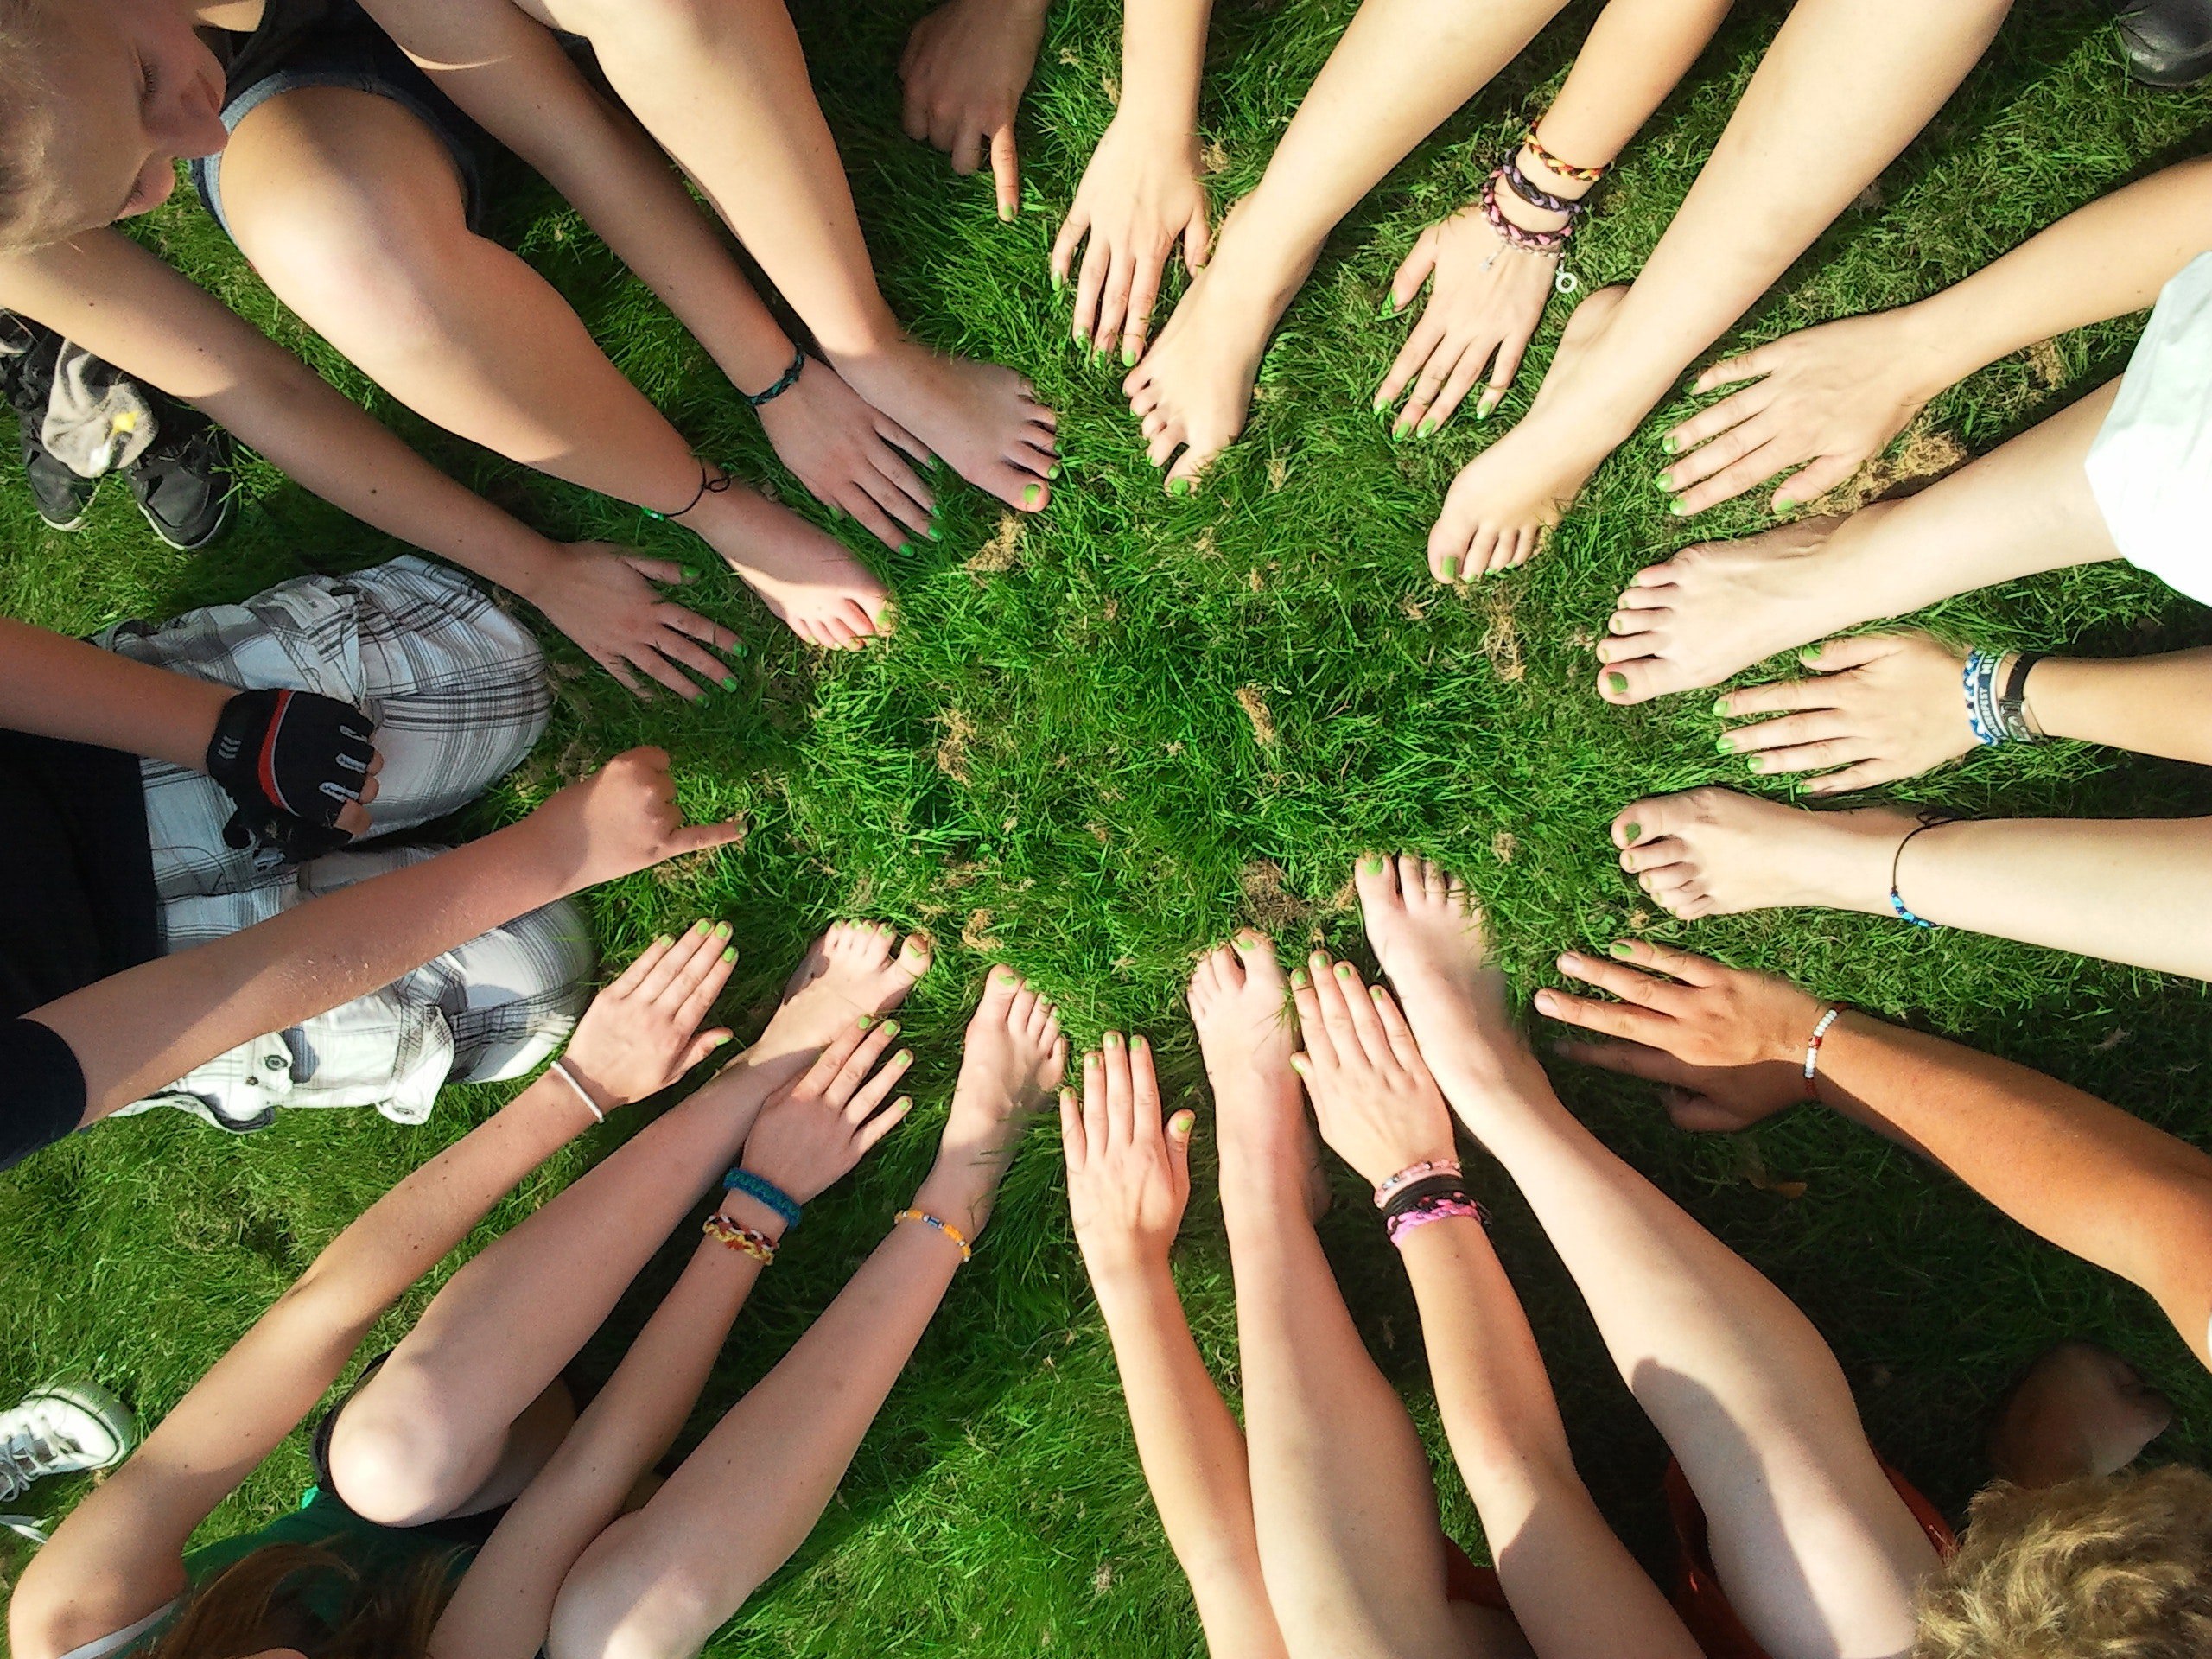 many hands and feet forming a circle on a green grass